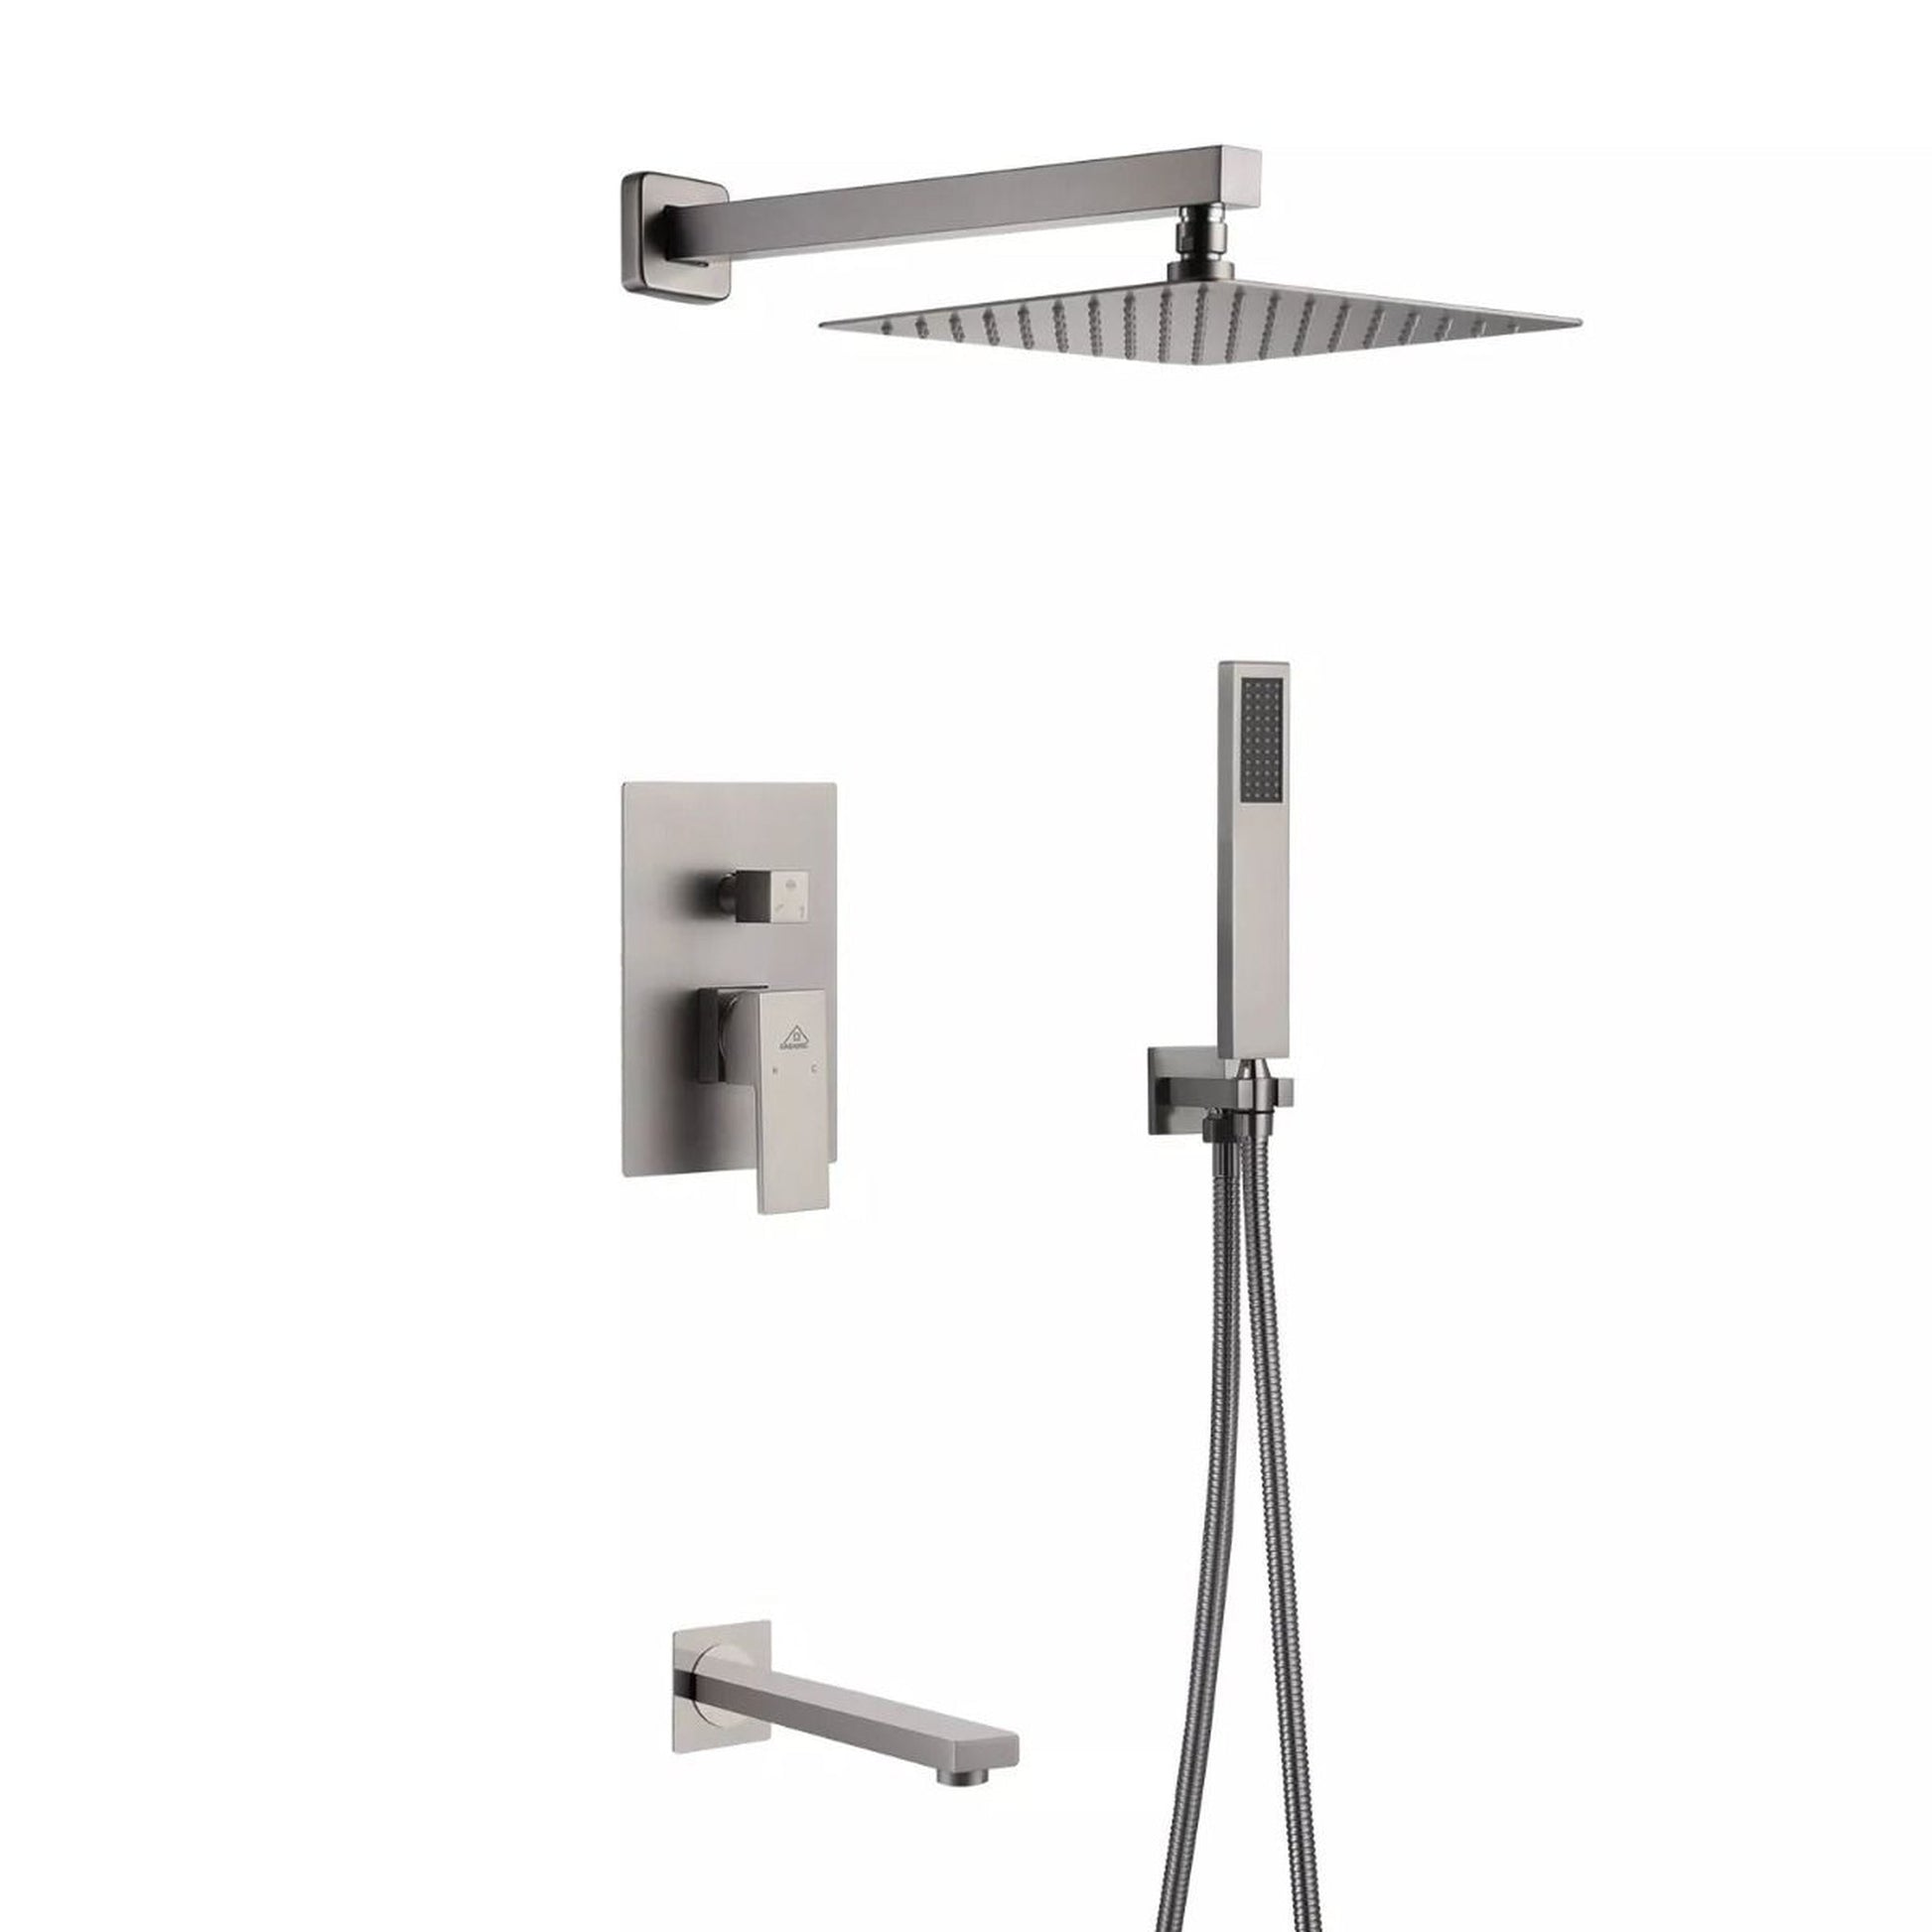 Ratel Brushed Nickel Wall-Mounted Shower System With 10" Square Rainfall Shower Head, Handheld Shower and Tub Filler Spout